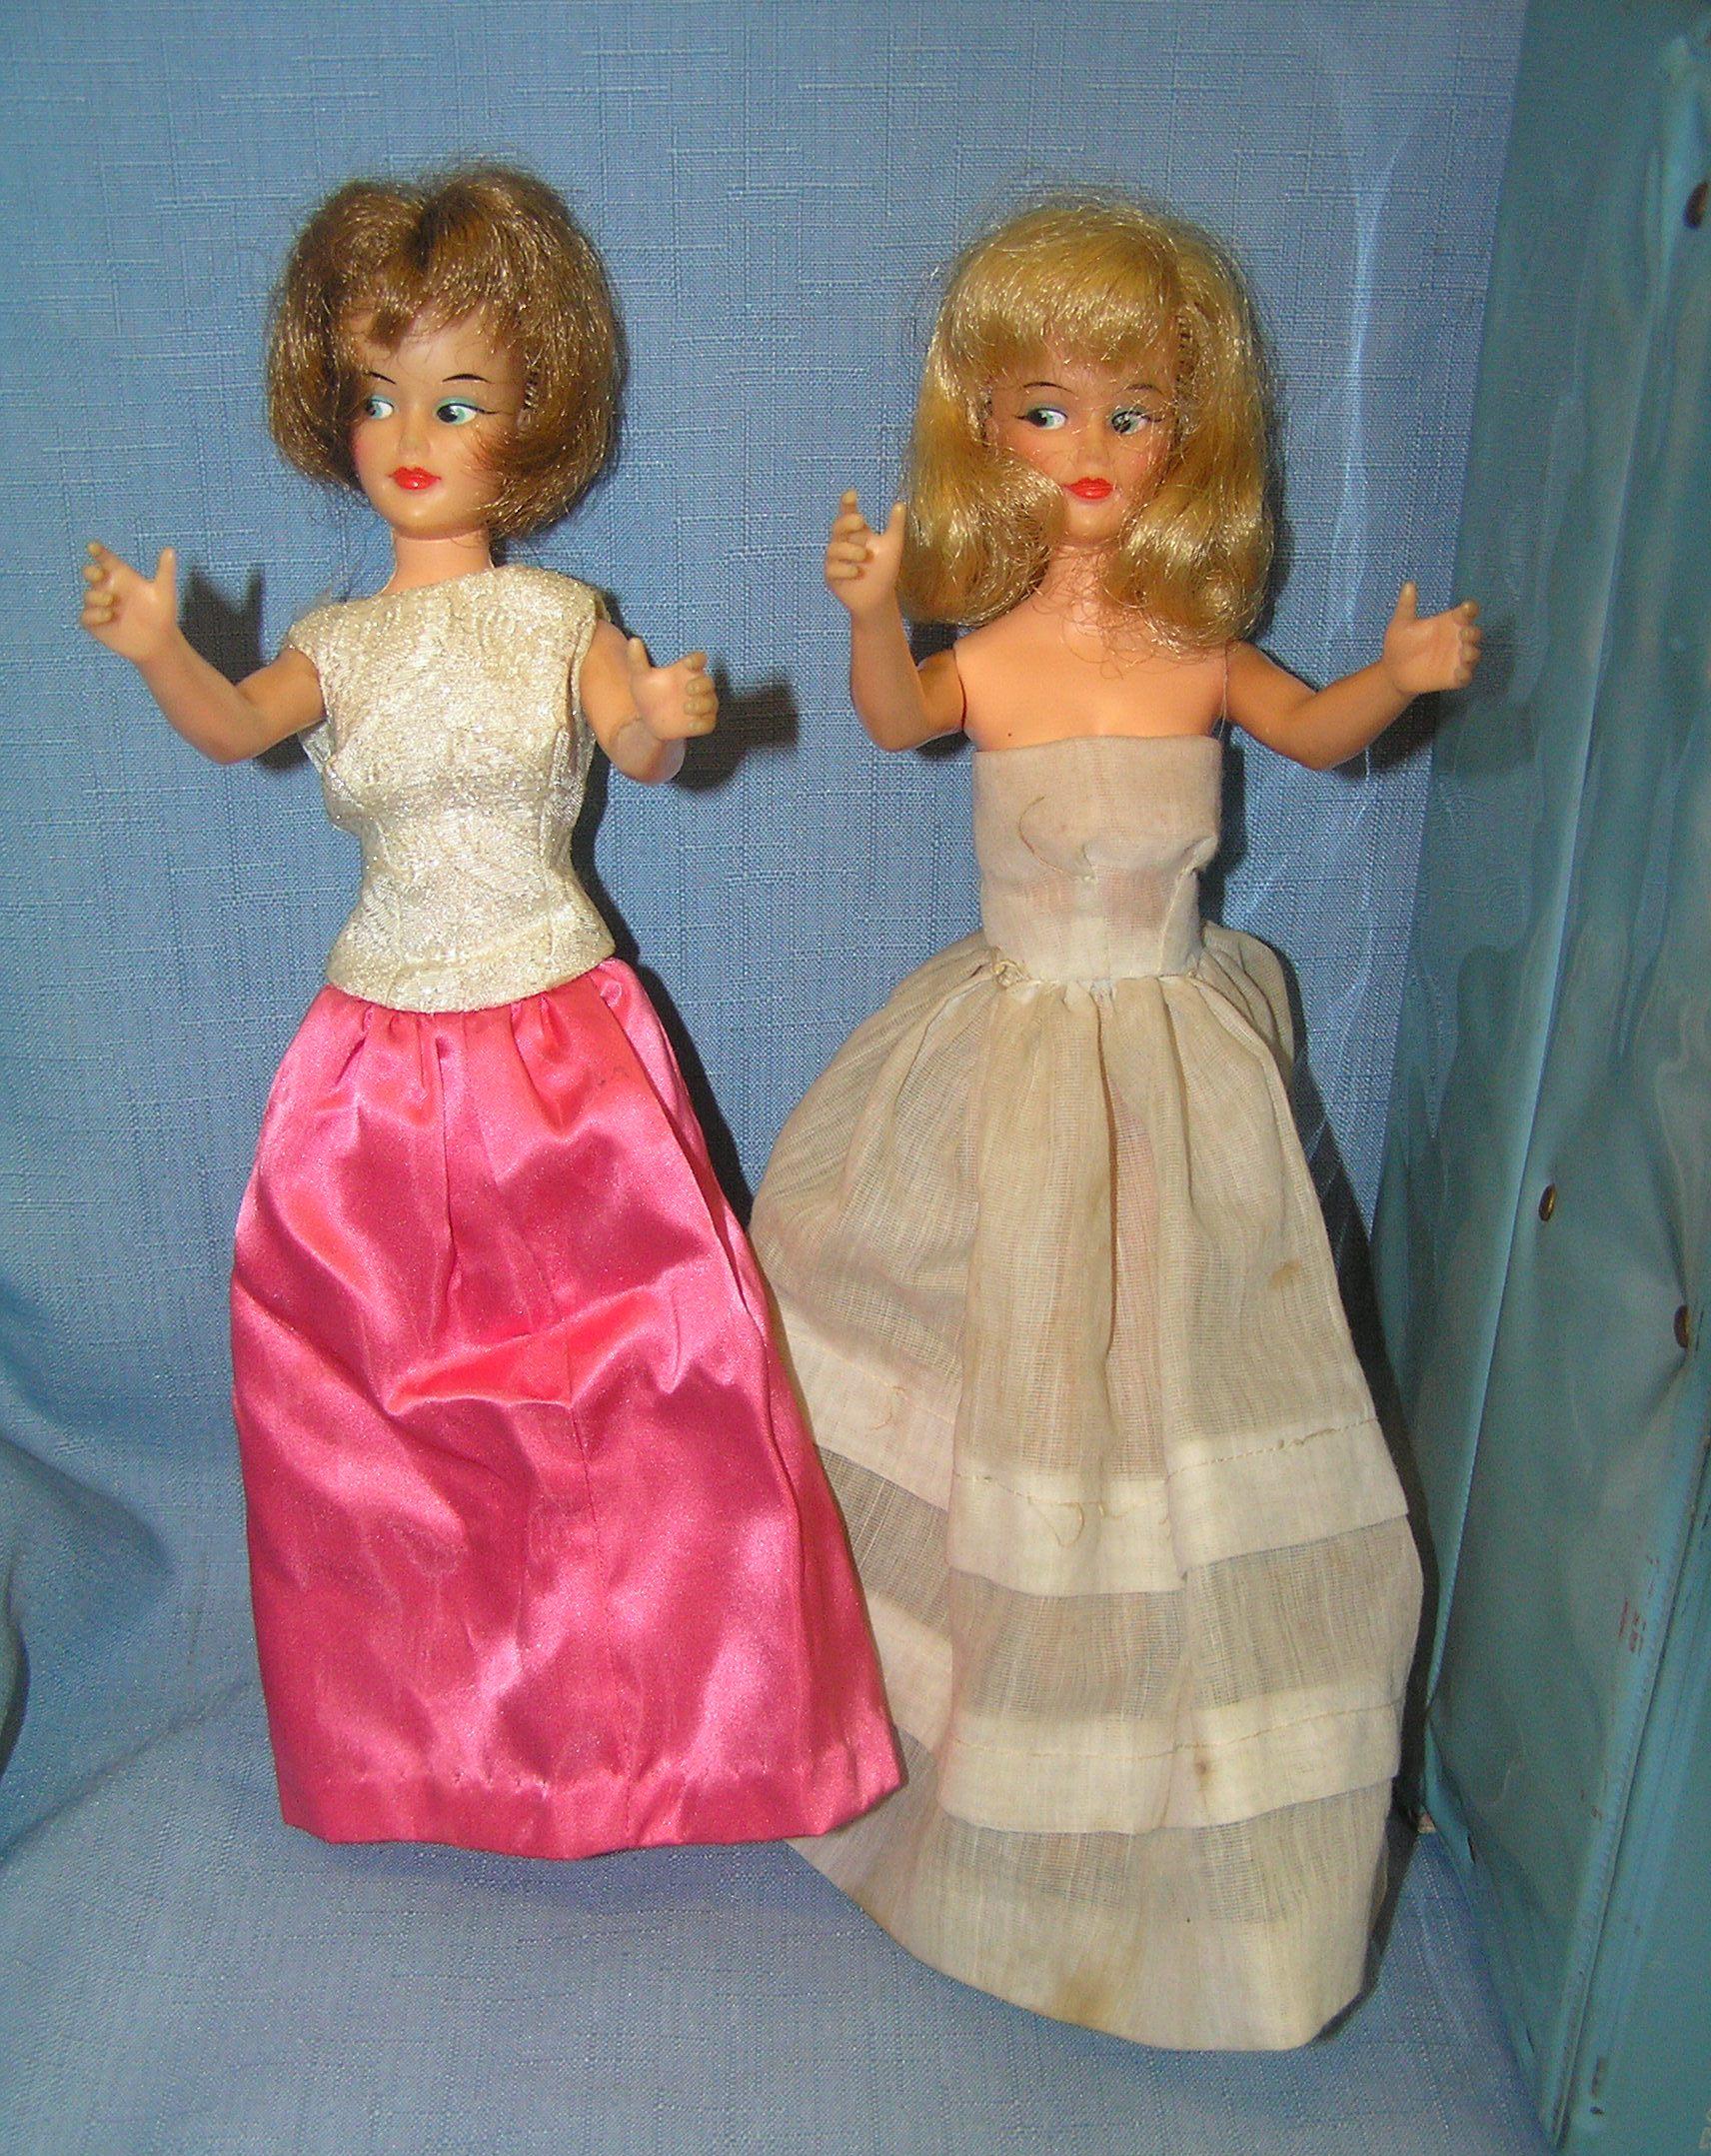 Barbie doll collection featuring 4 vintage dolls and more